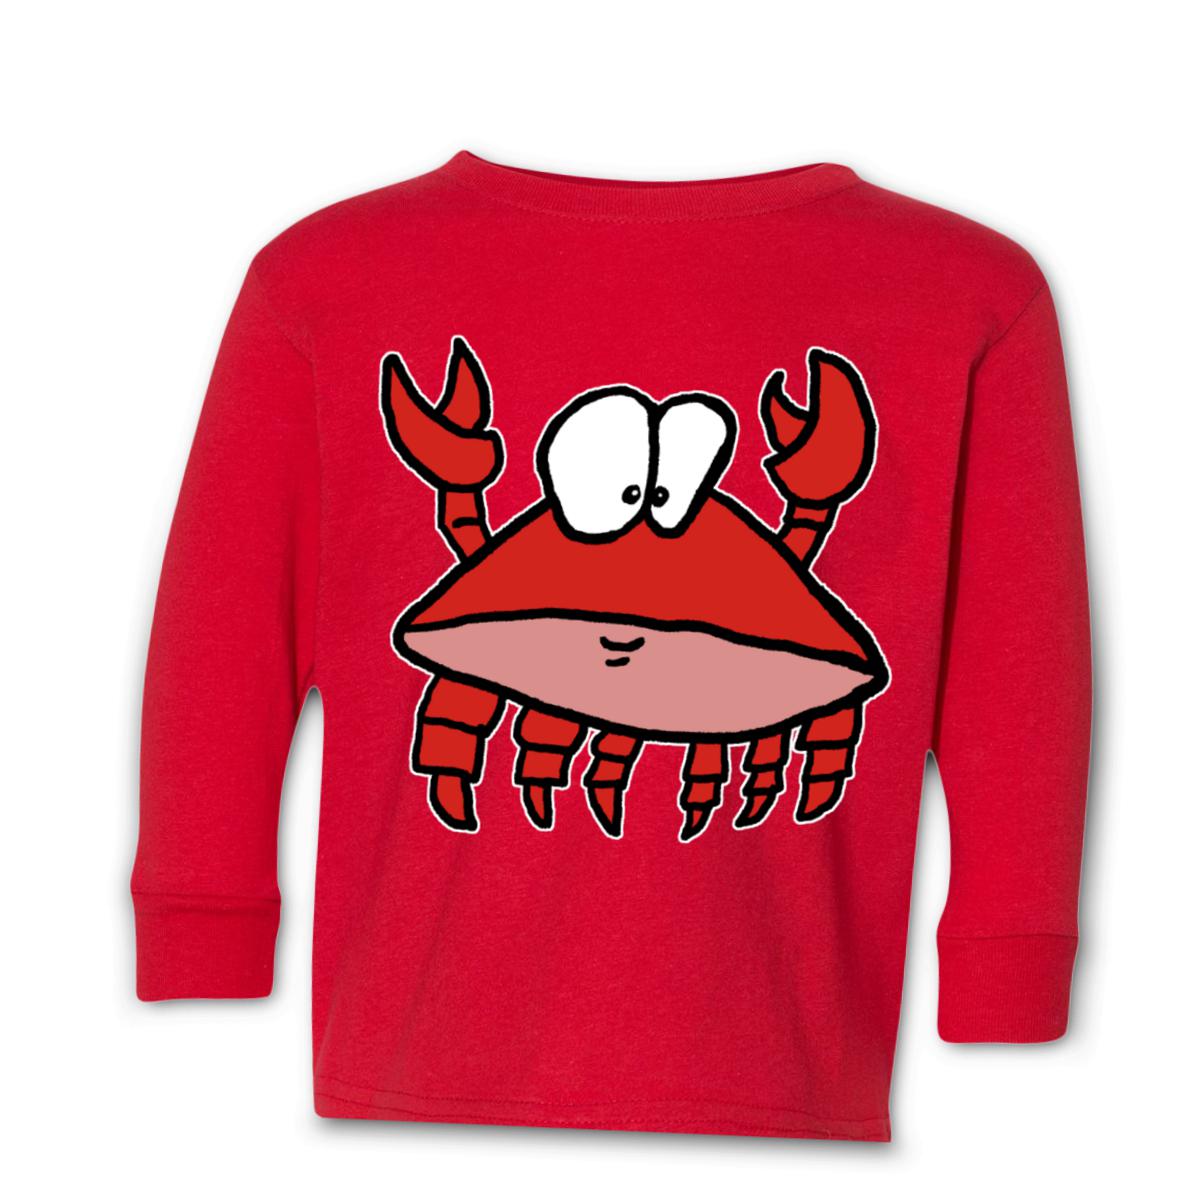 Crab 2.0 Kid's Long Sleeve Tee Small red